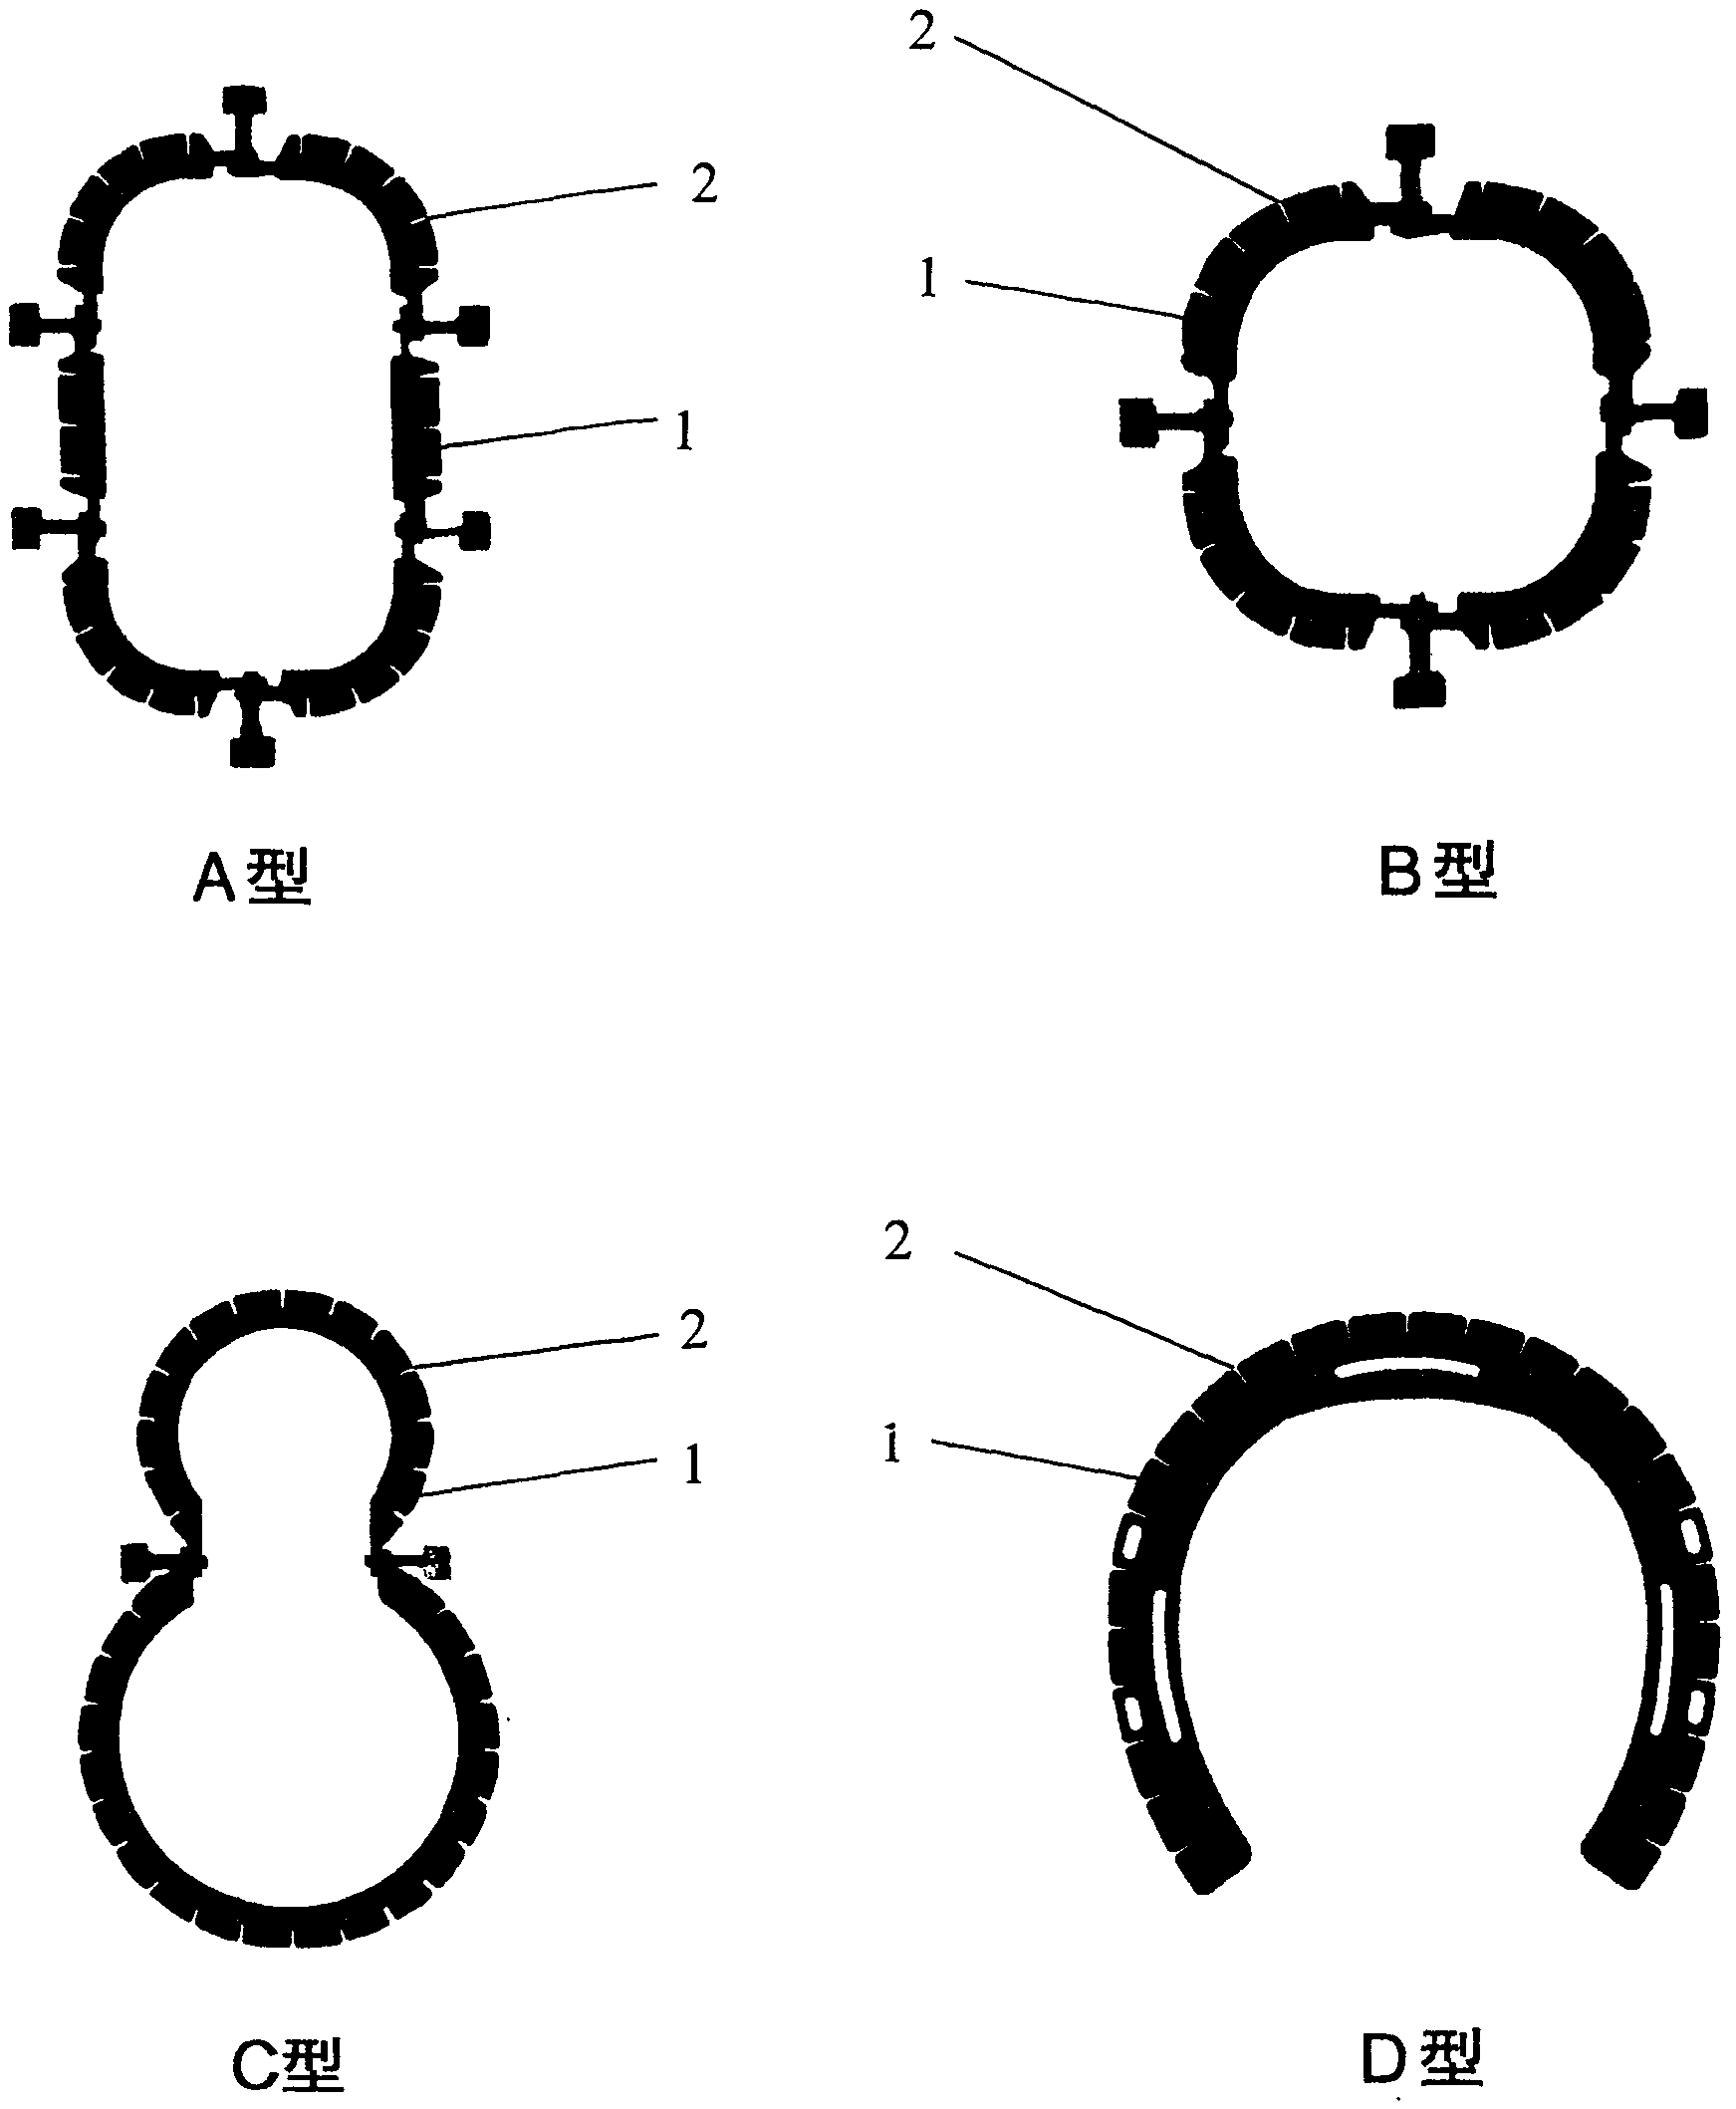 Skin draw hook retractor fixing device for operations